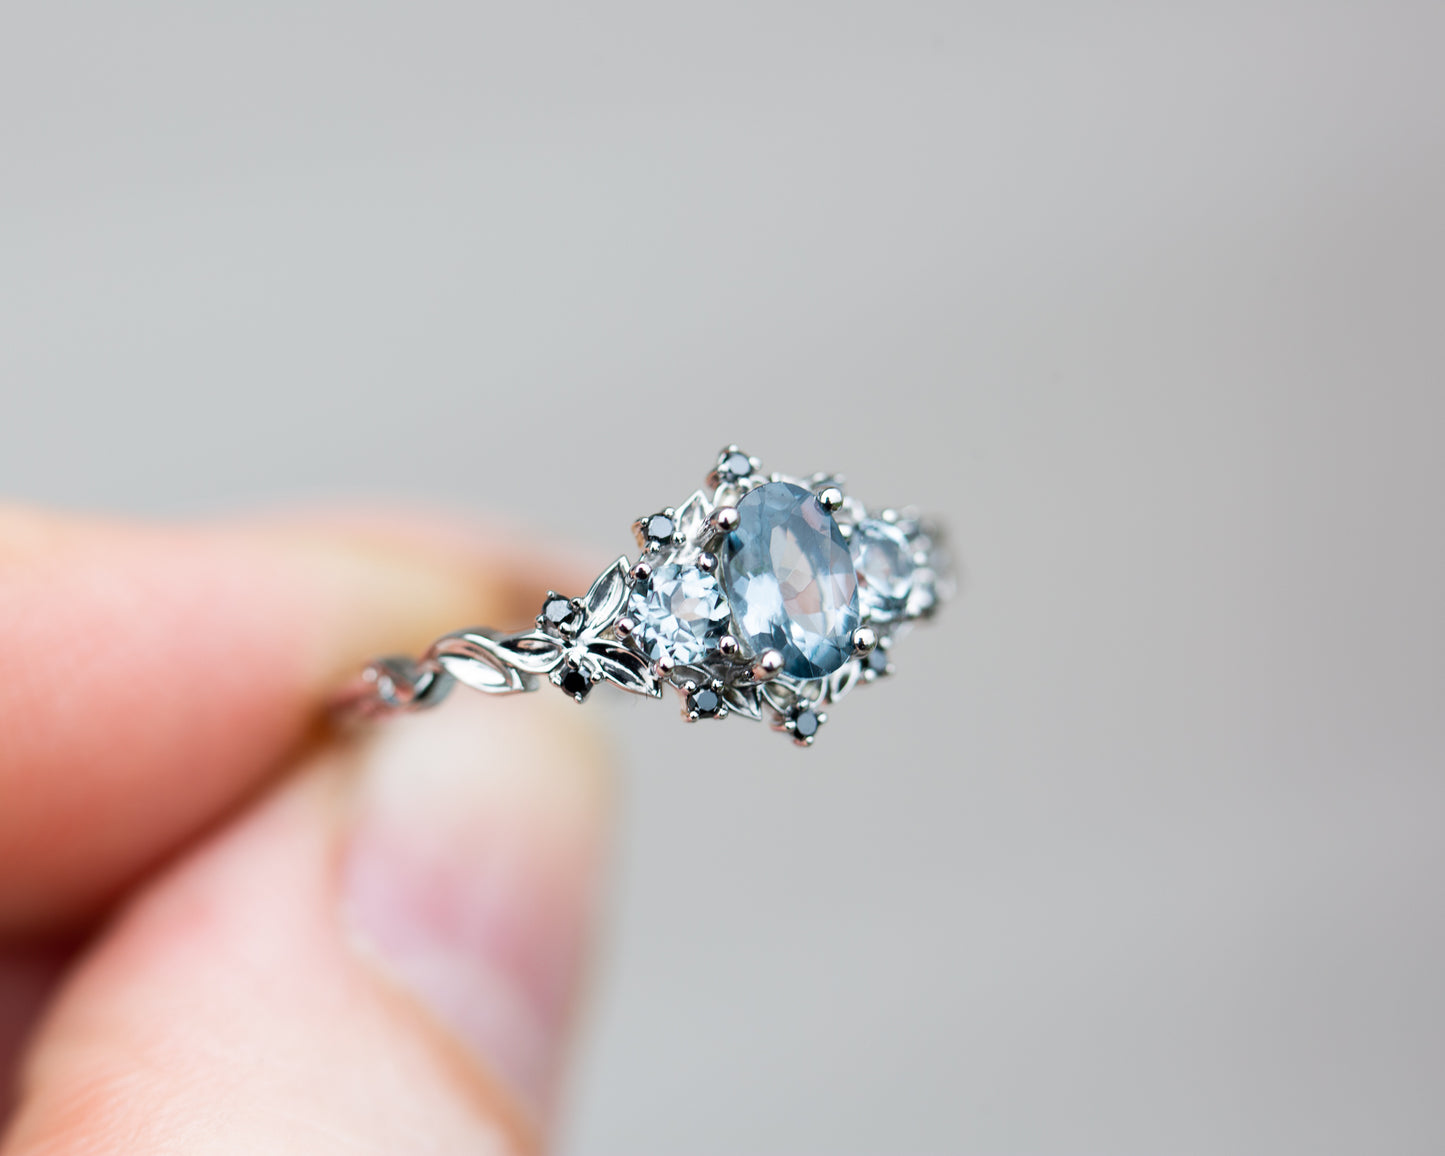 Briar rose three stone with grey spinel and black diamonds